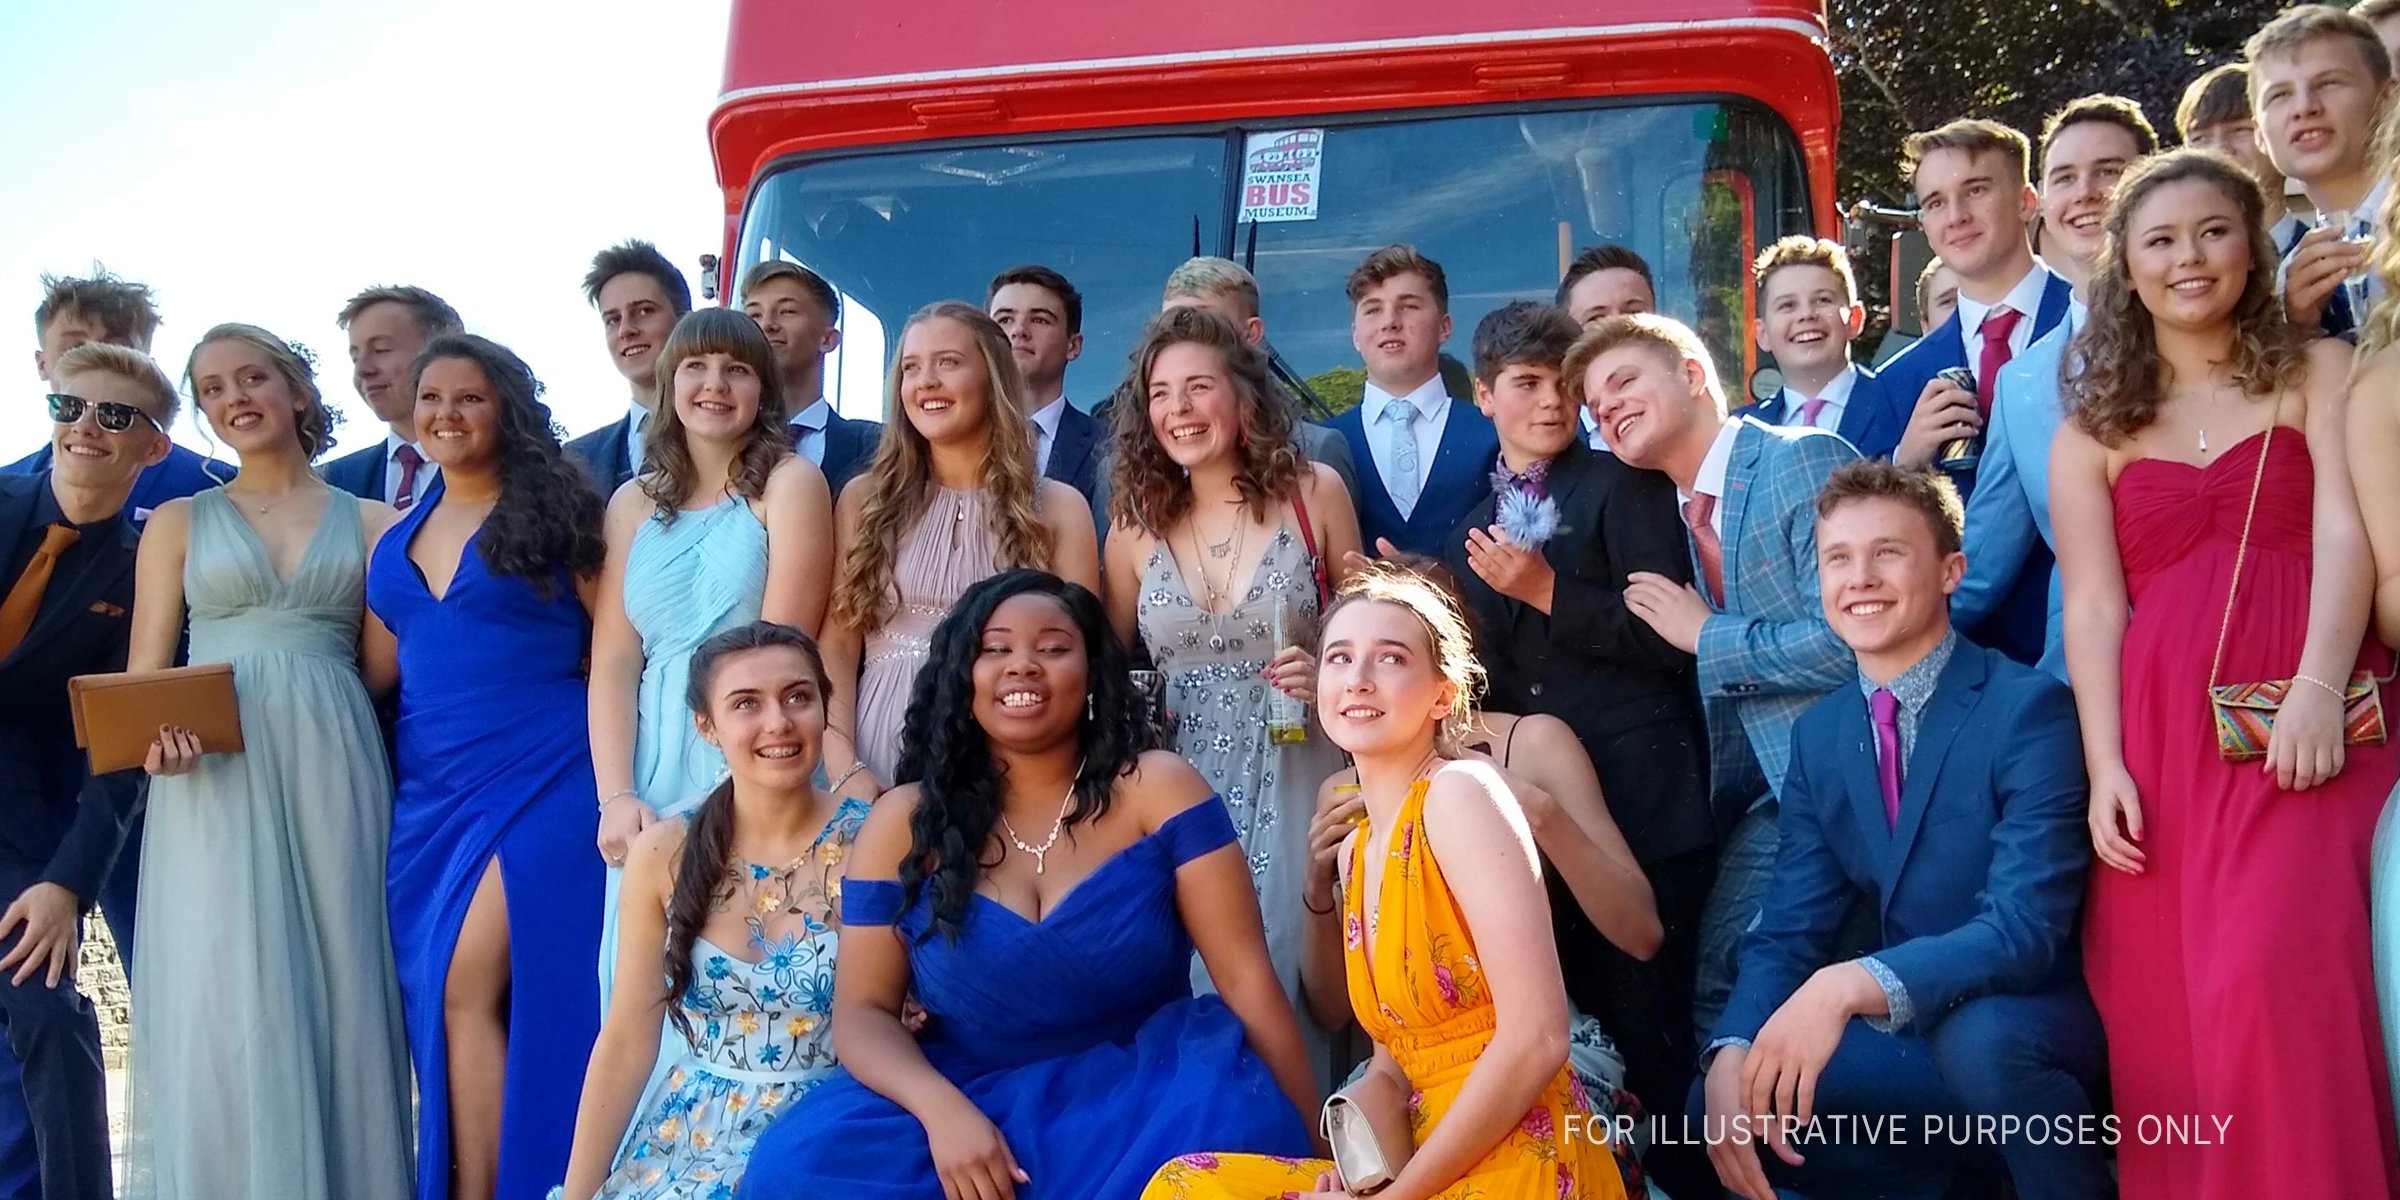 Teens posing for their prom picture. | Source: Flickr / Thomas Guest (CC BY 2.0)